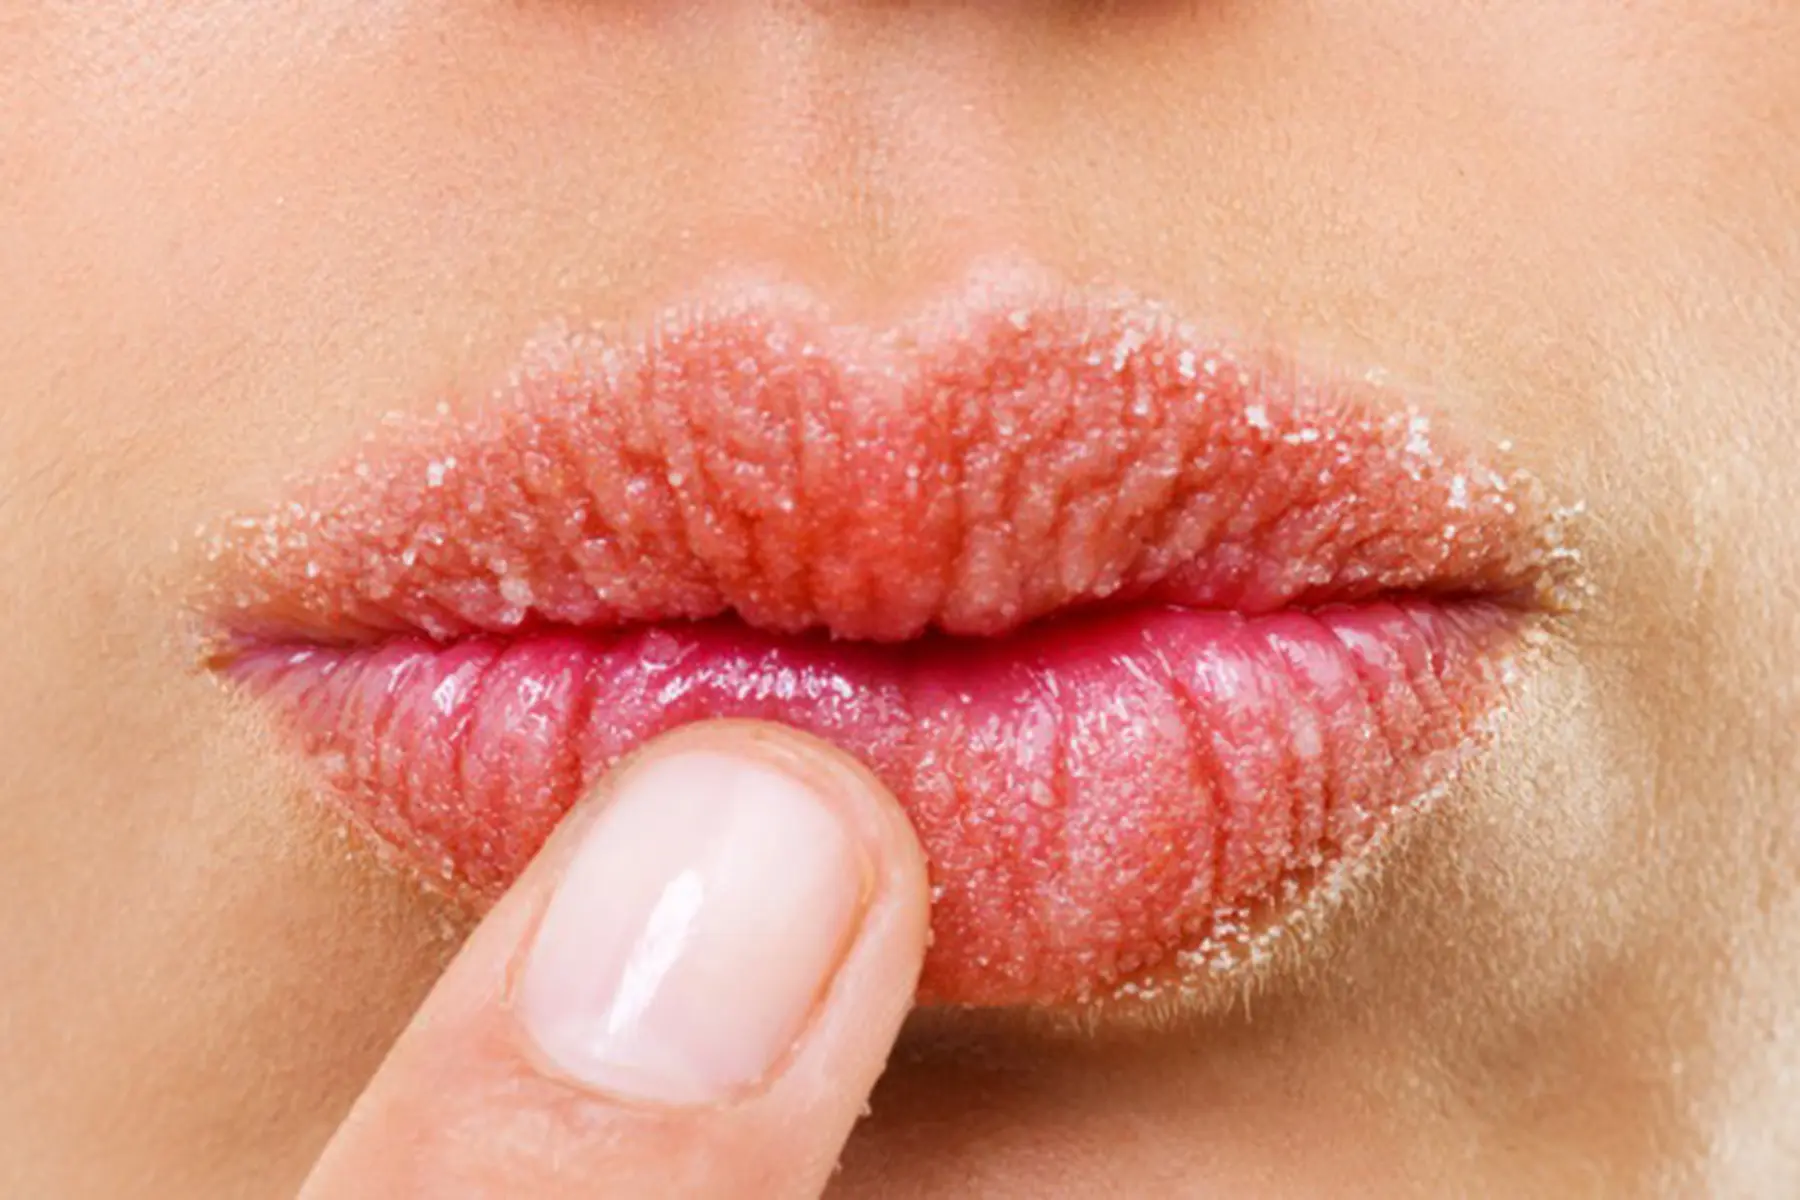 Woman touching her chapped and inflamed lips.